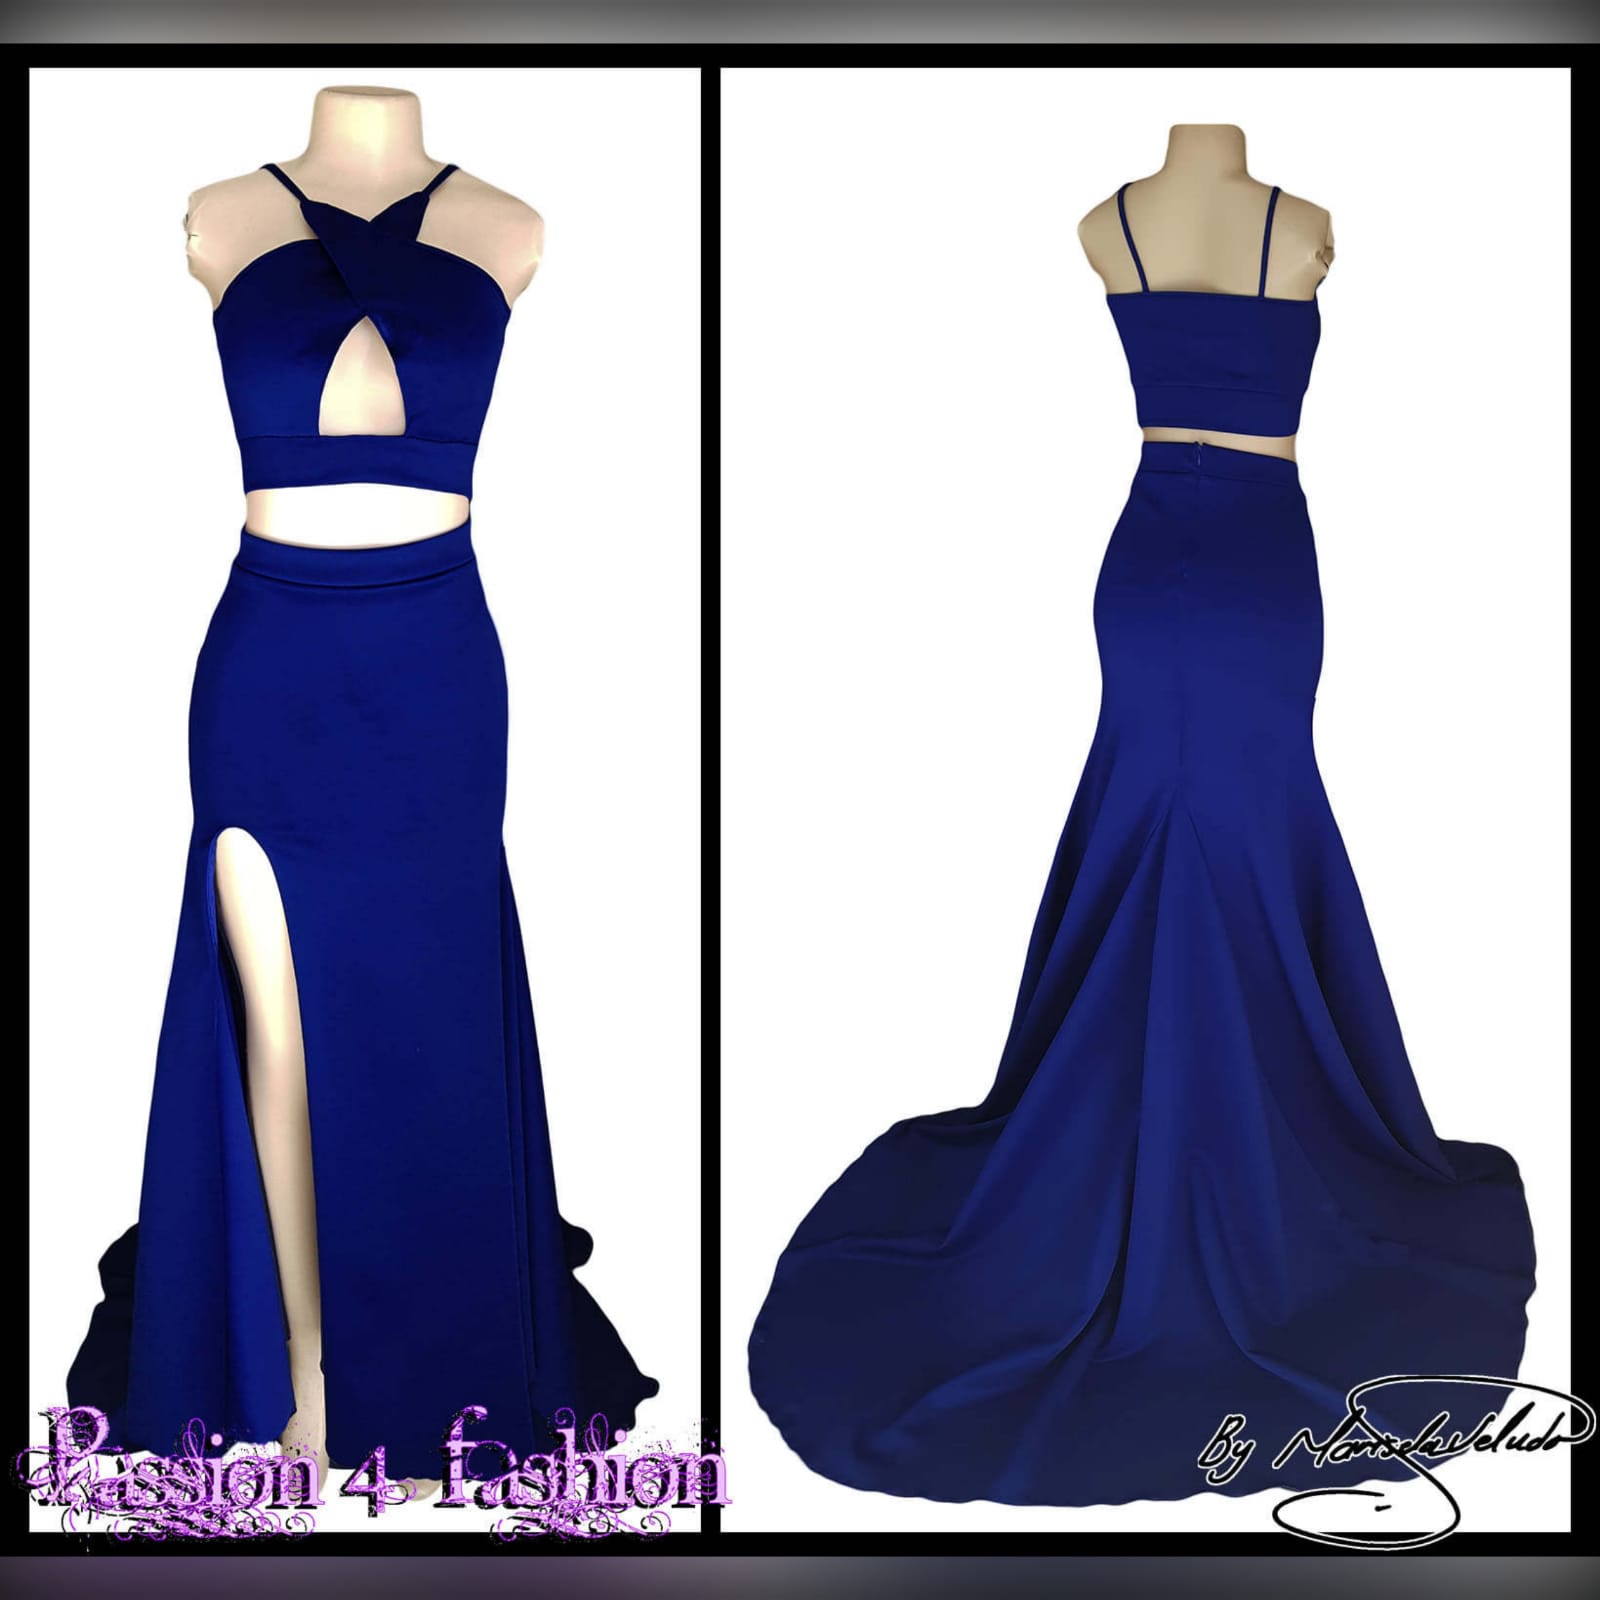 2 piece royal blue prom dress 2 2 piece royal blue prom dress. Crop top with cleavage opening. Fitted skirt with a slit and a train.